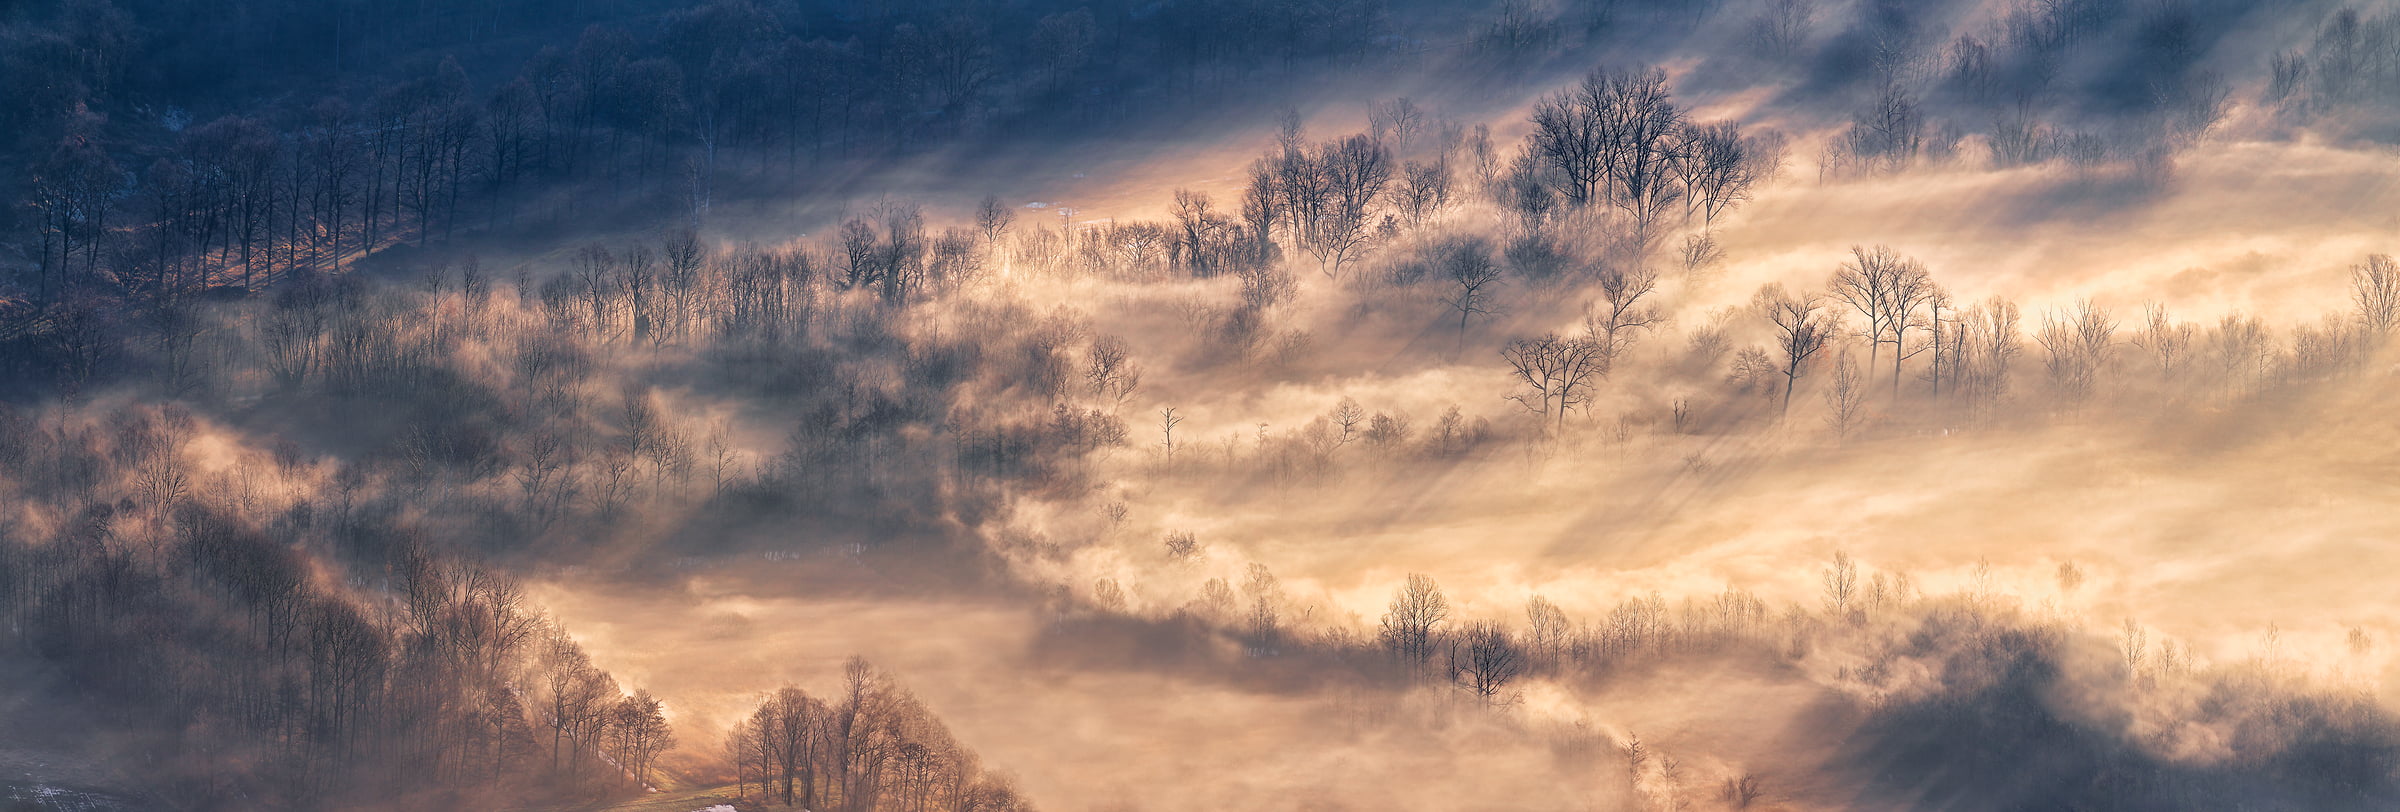 109 megapixels! A very high resolution, large-format VAST photo print of sun rays and trees at sunrise; landscape photograph created by Duilio Fiorille in Avigliana, Piedmont, Italy